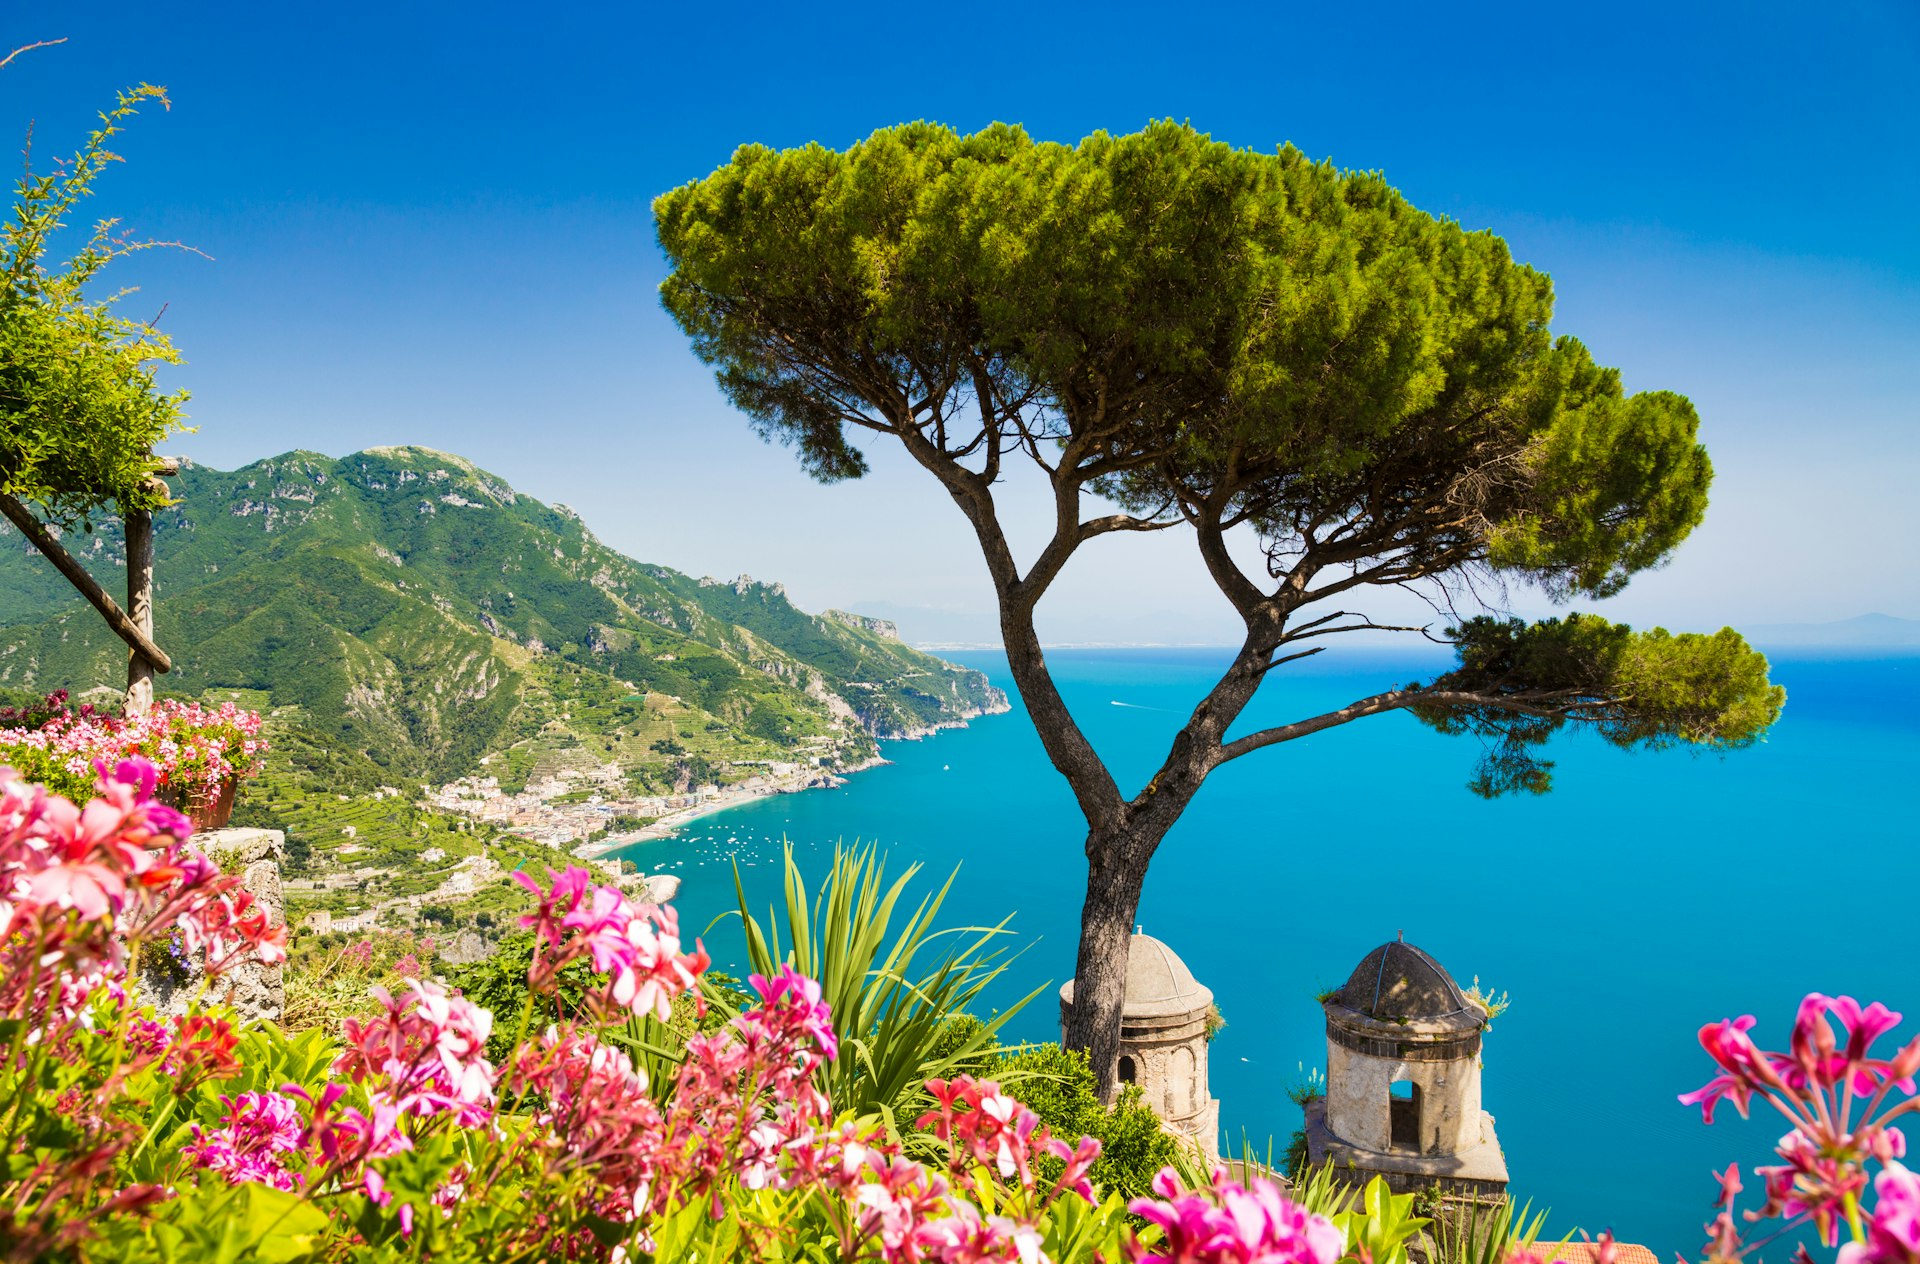 Postcard view of the famous Amalfi Coast from Ravello, Italy